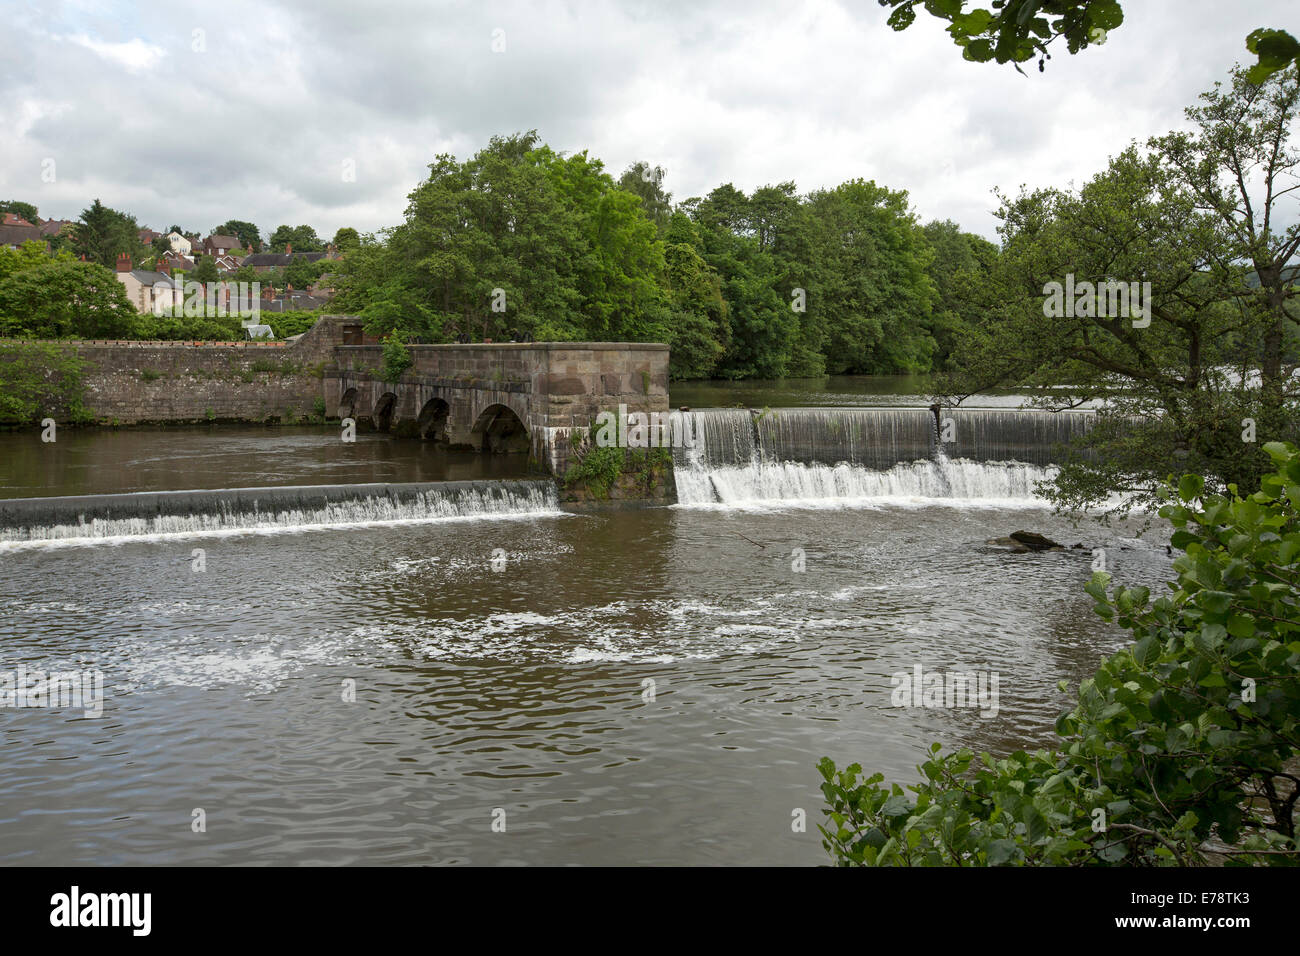 Derwent River spilling over horseshoe shaped weir at English village of Belper with riverbank trees reflected in calm water Stock Photo